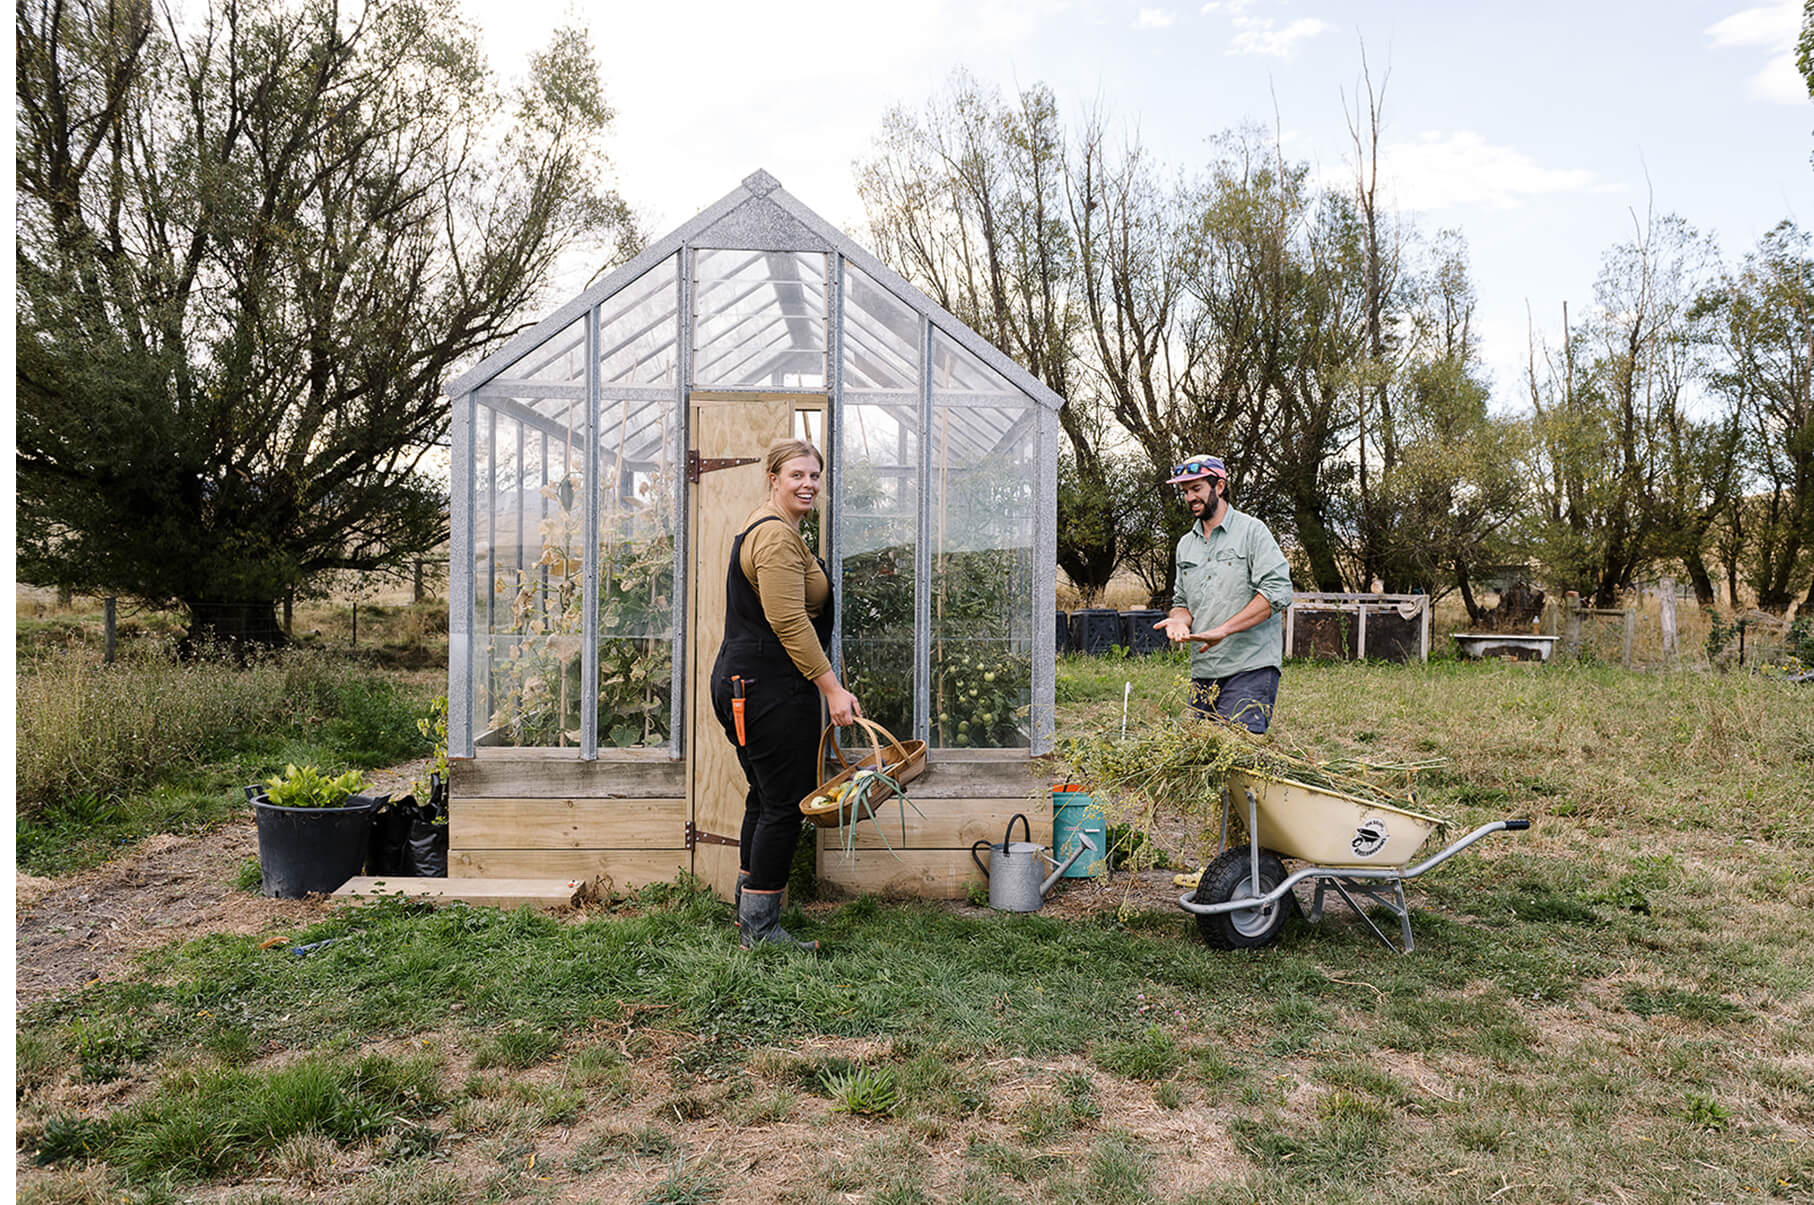 A Central Otago garden that seamlessly blends hospitality and rural living